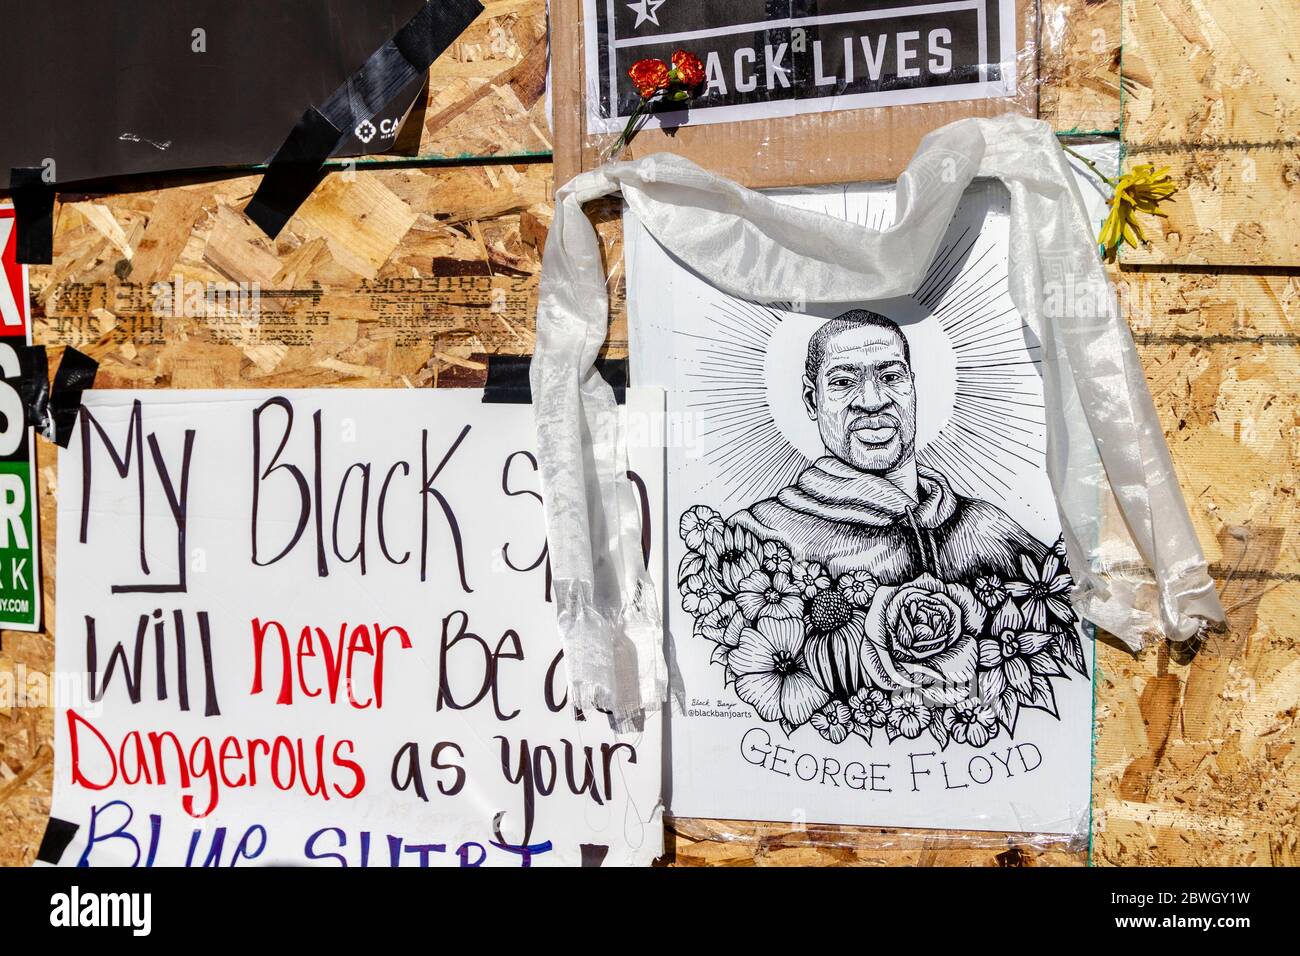 Minneapolis, United States. 30th May, 2020. Minneapolis, MN - May 30, 2020: George Floyd memorial site at the aftermath scene of the George Floyd Black Lives Matter protest and riots on May 30, 2020 in Minneapolis, Minnesota. Credit: Jake Handegard/The Photo Access Credit: The Photo Access/Alamy Live News Stock Photo